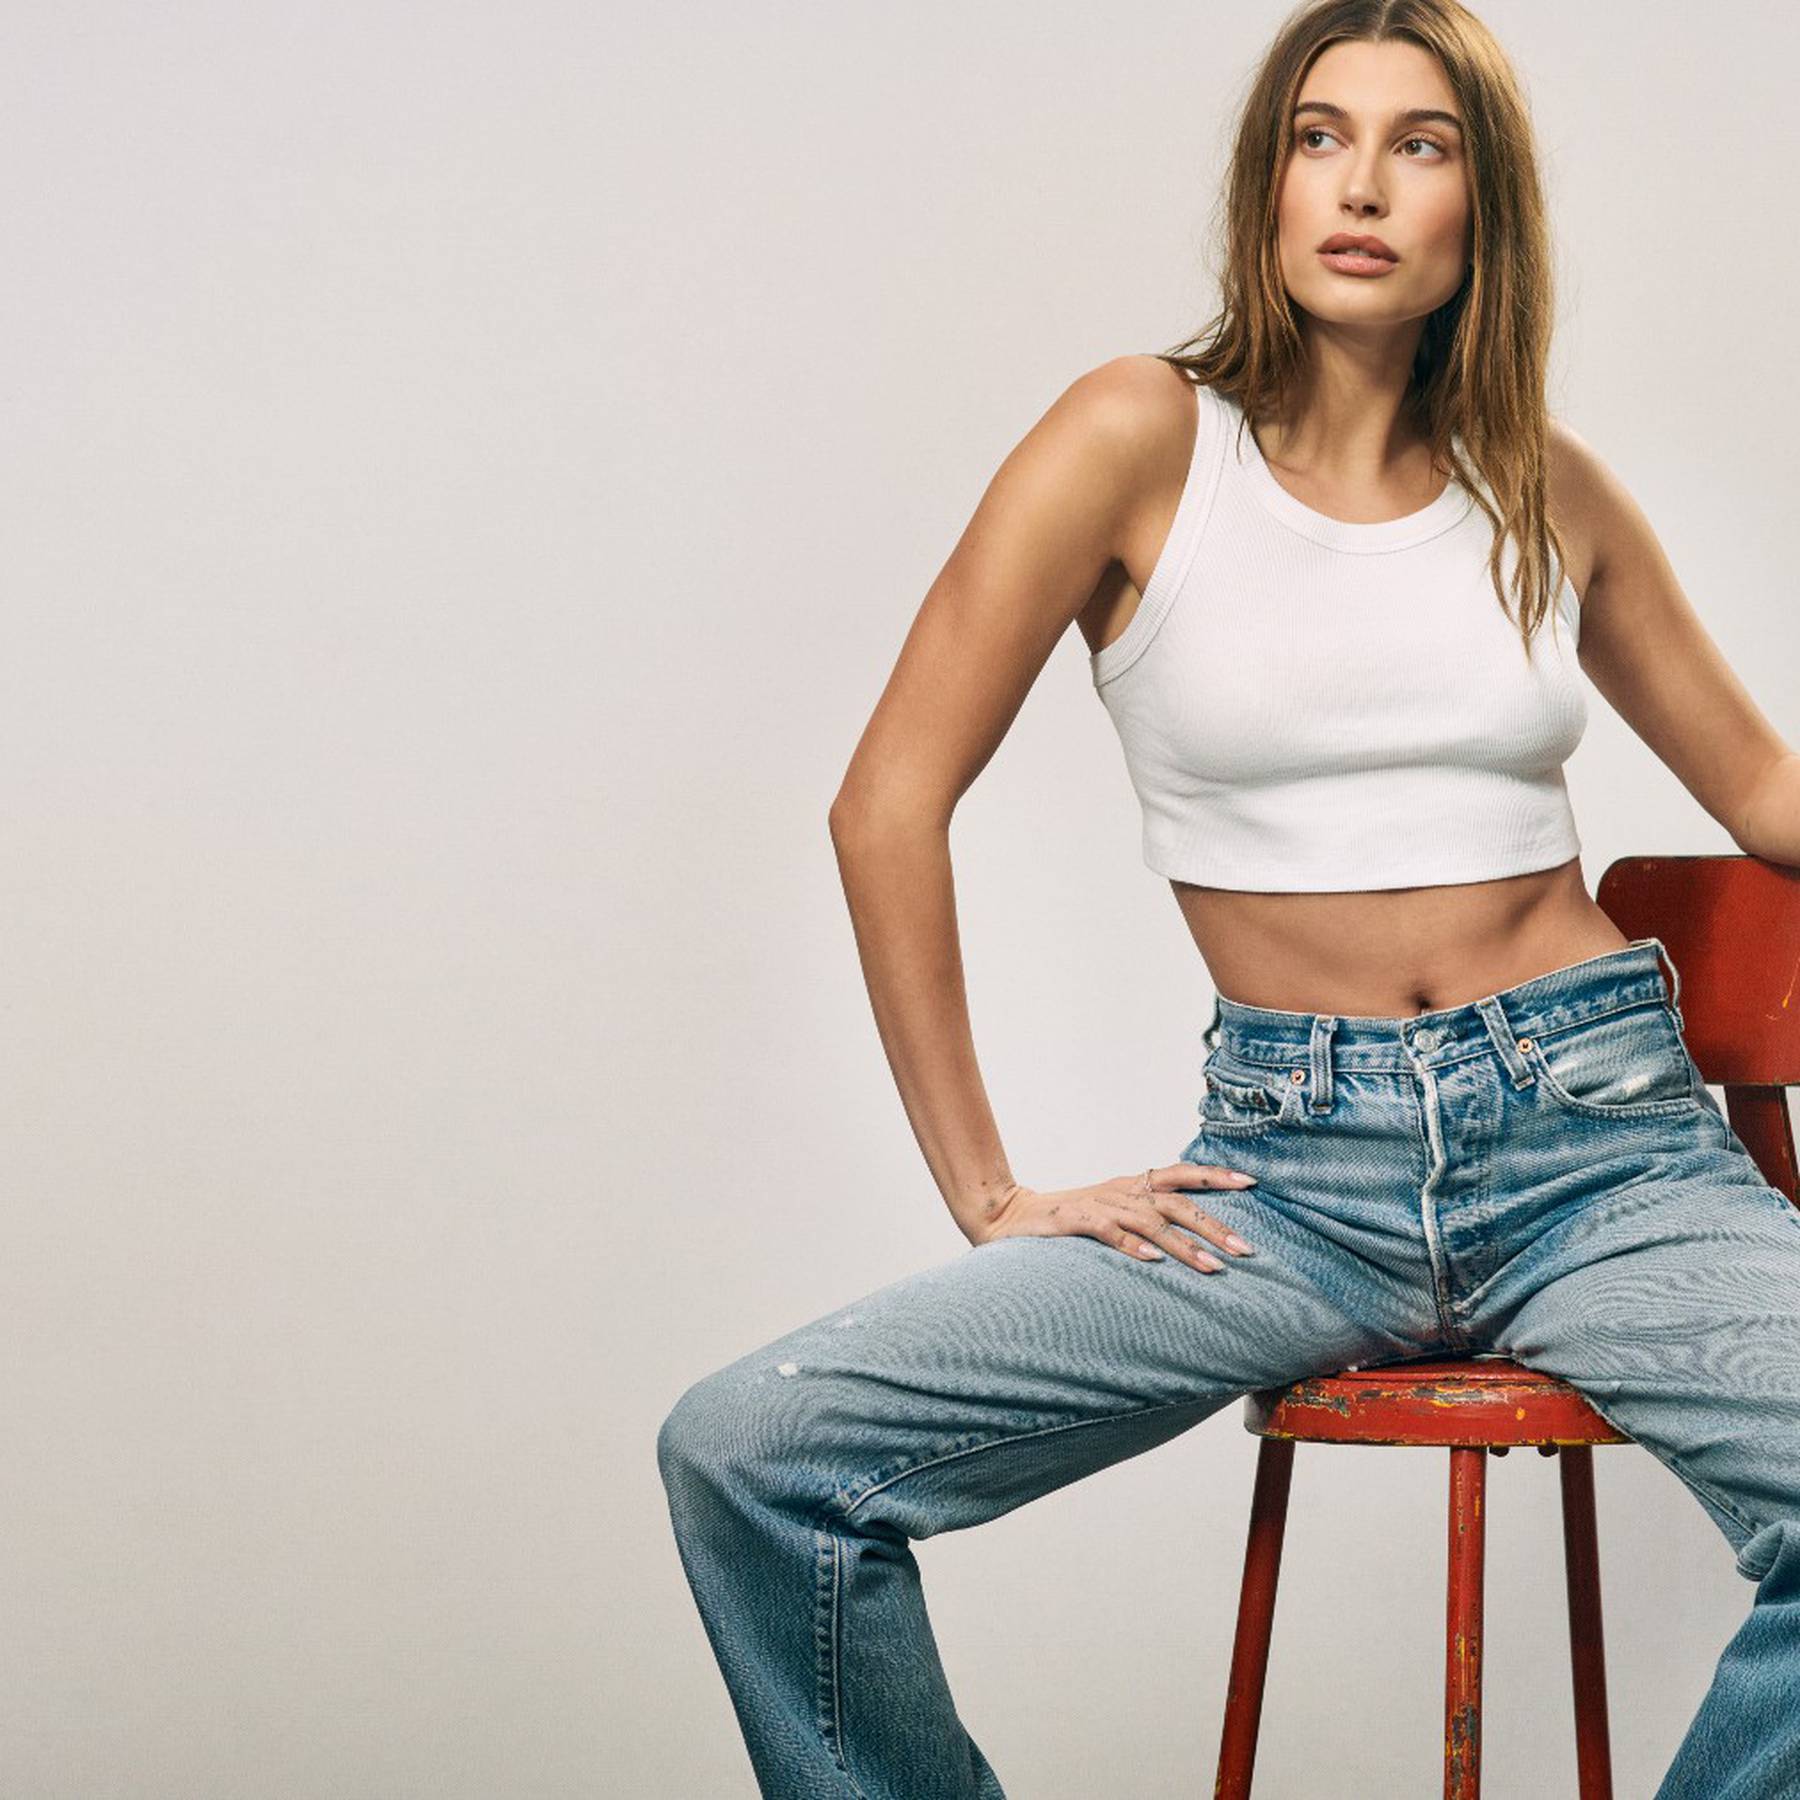 Can Levi's Be More Than a Denim Brand? | BoF